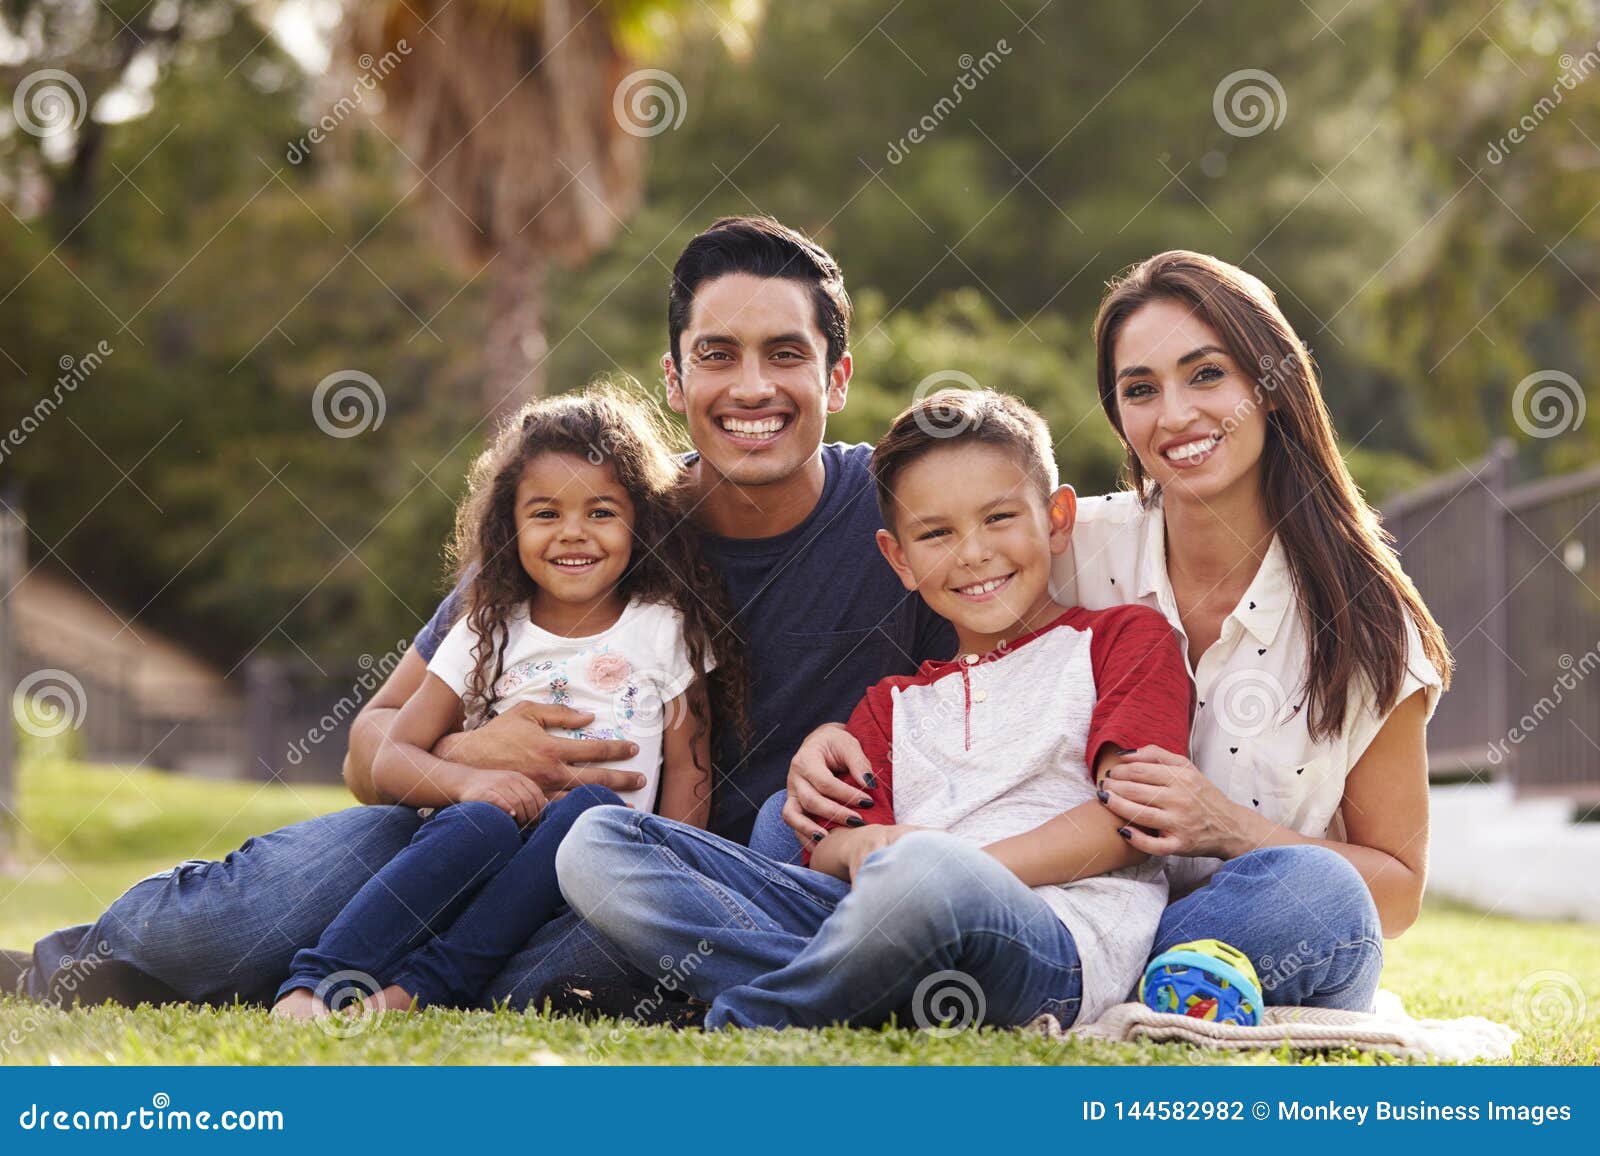 happy young hispanic family sitting the on grass in the park smiling to camera, close up